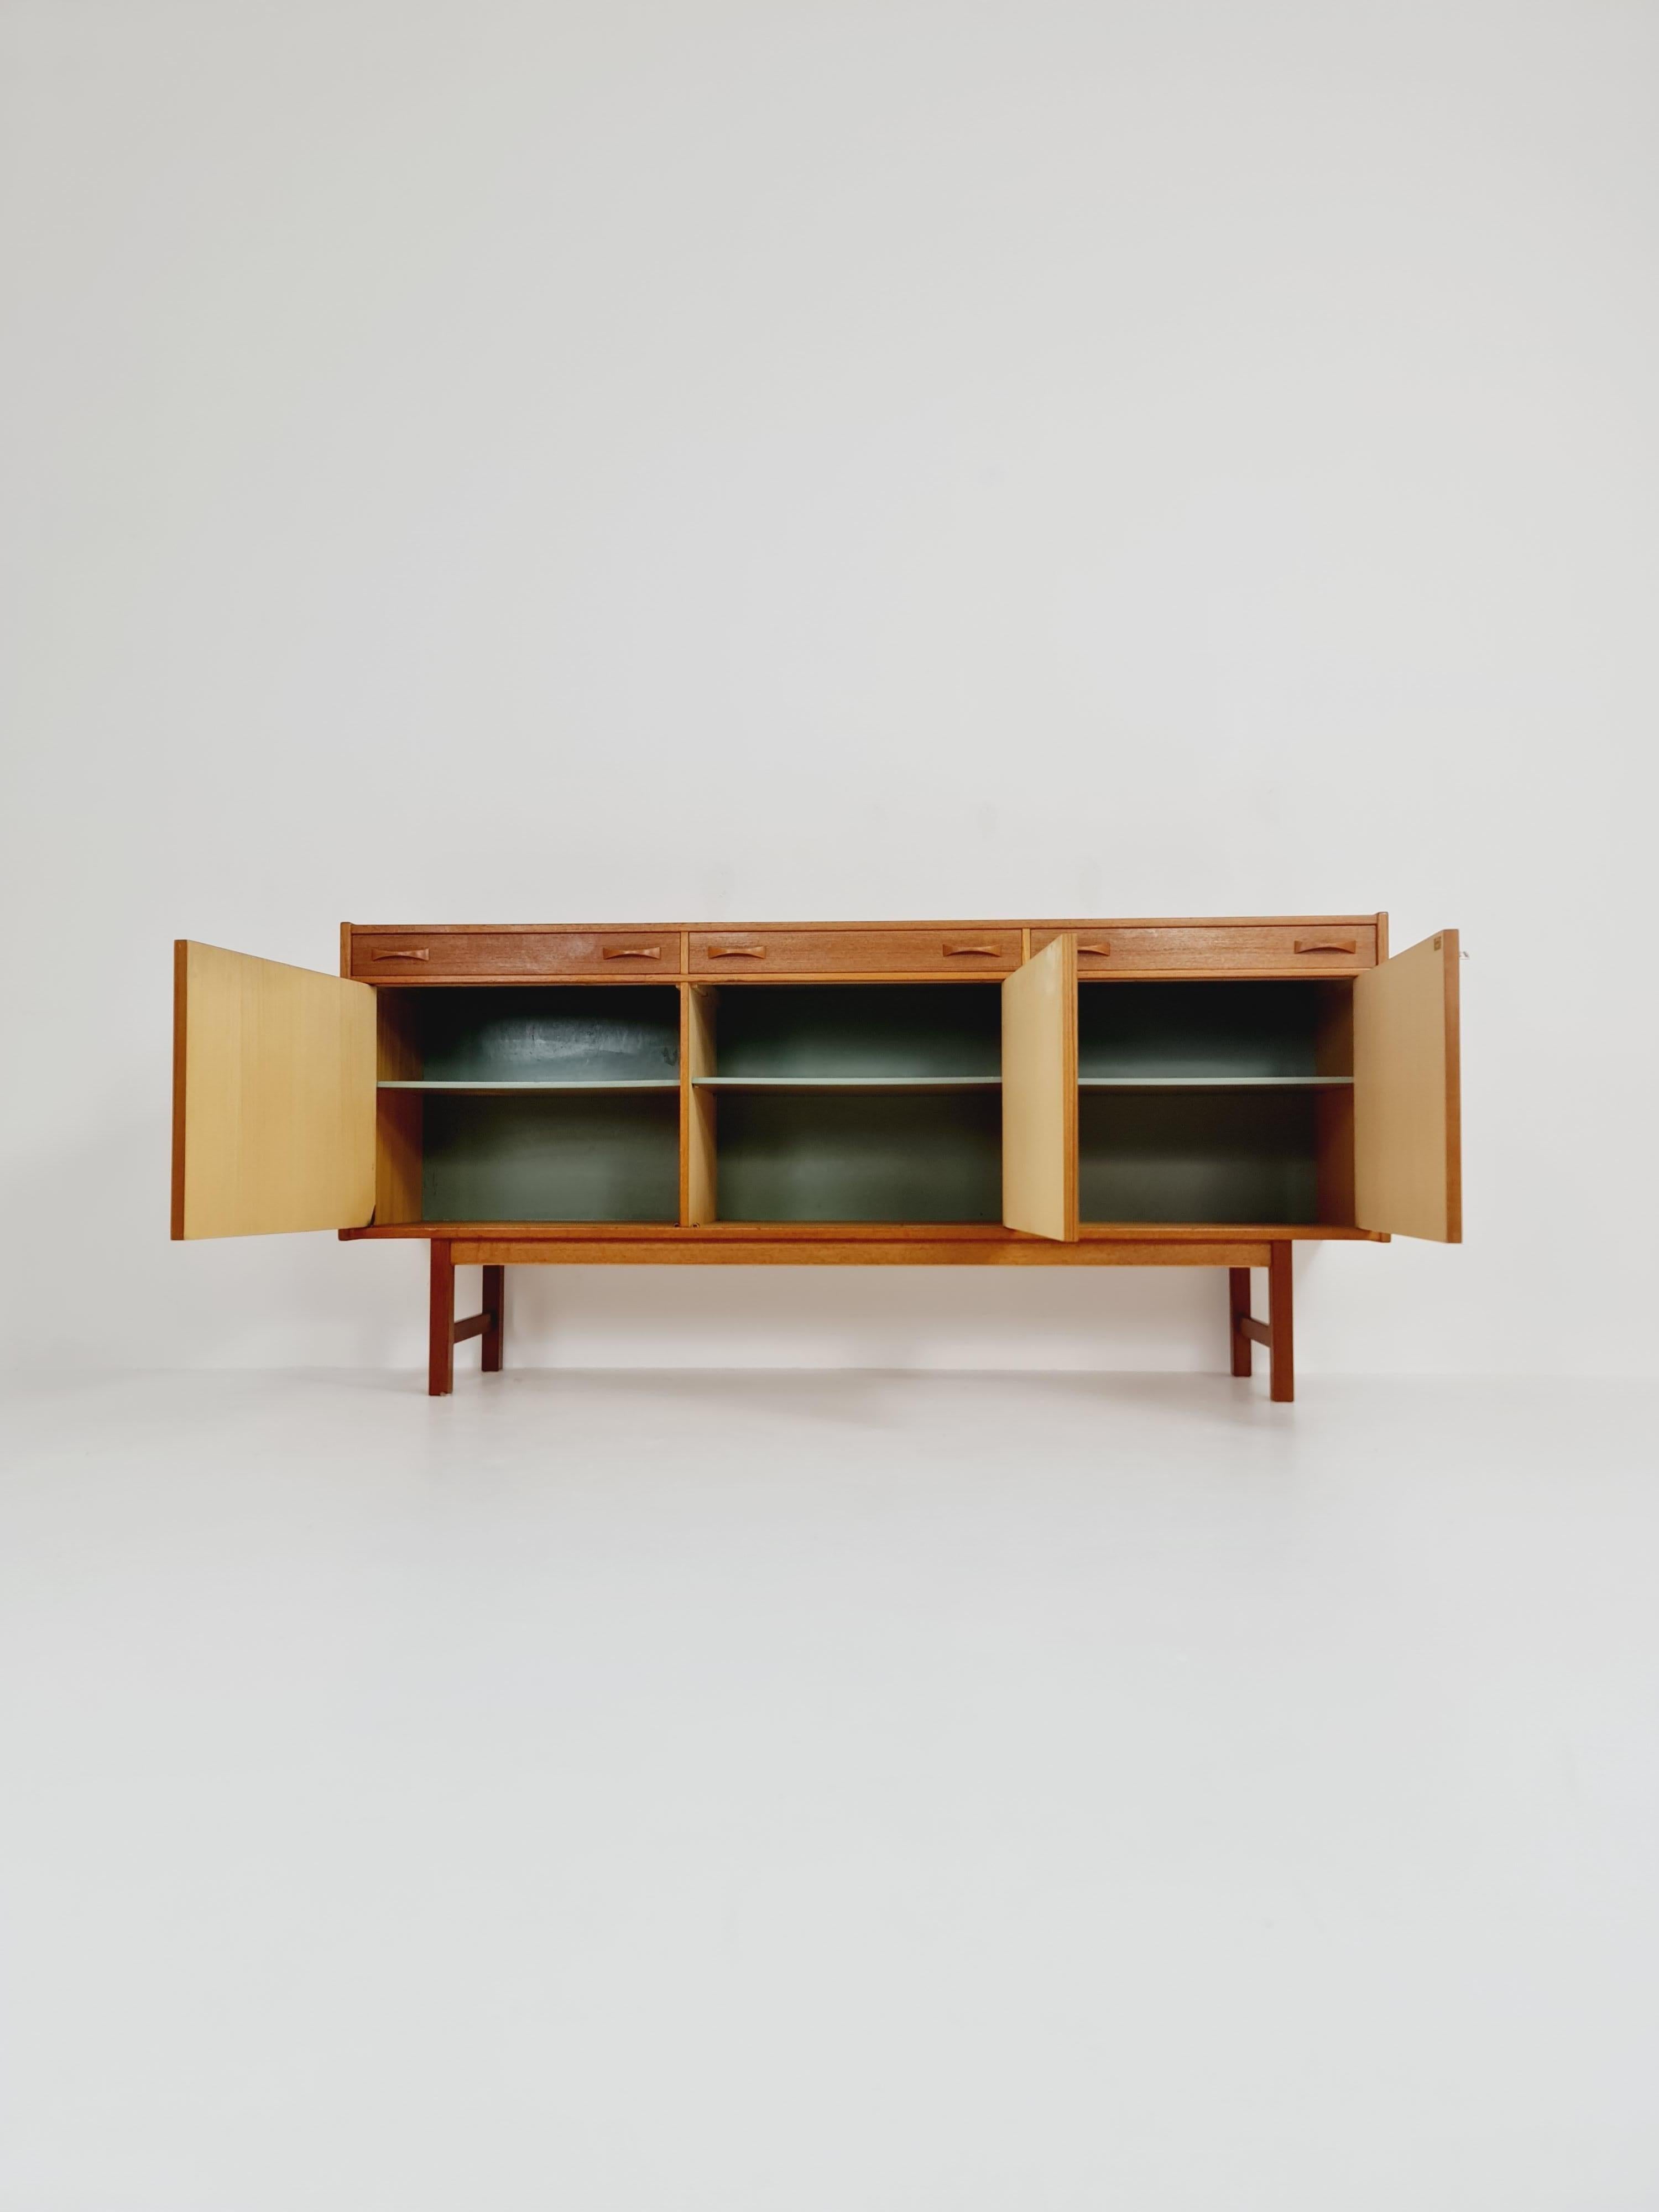 Mid century Swedish Teak Sideboard by Tage Olofsson for Ulferts, 1960s

Designer: Tage Olofssson for Ulferts 

Dimensions: 
44 D x 183 W x 88 H cm

It is in vintage condition, however, as with all vintage items some minor wear marks should be